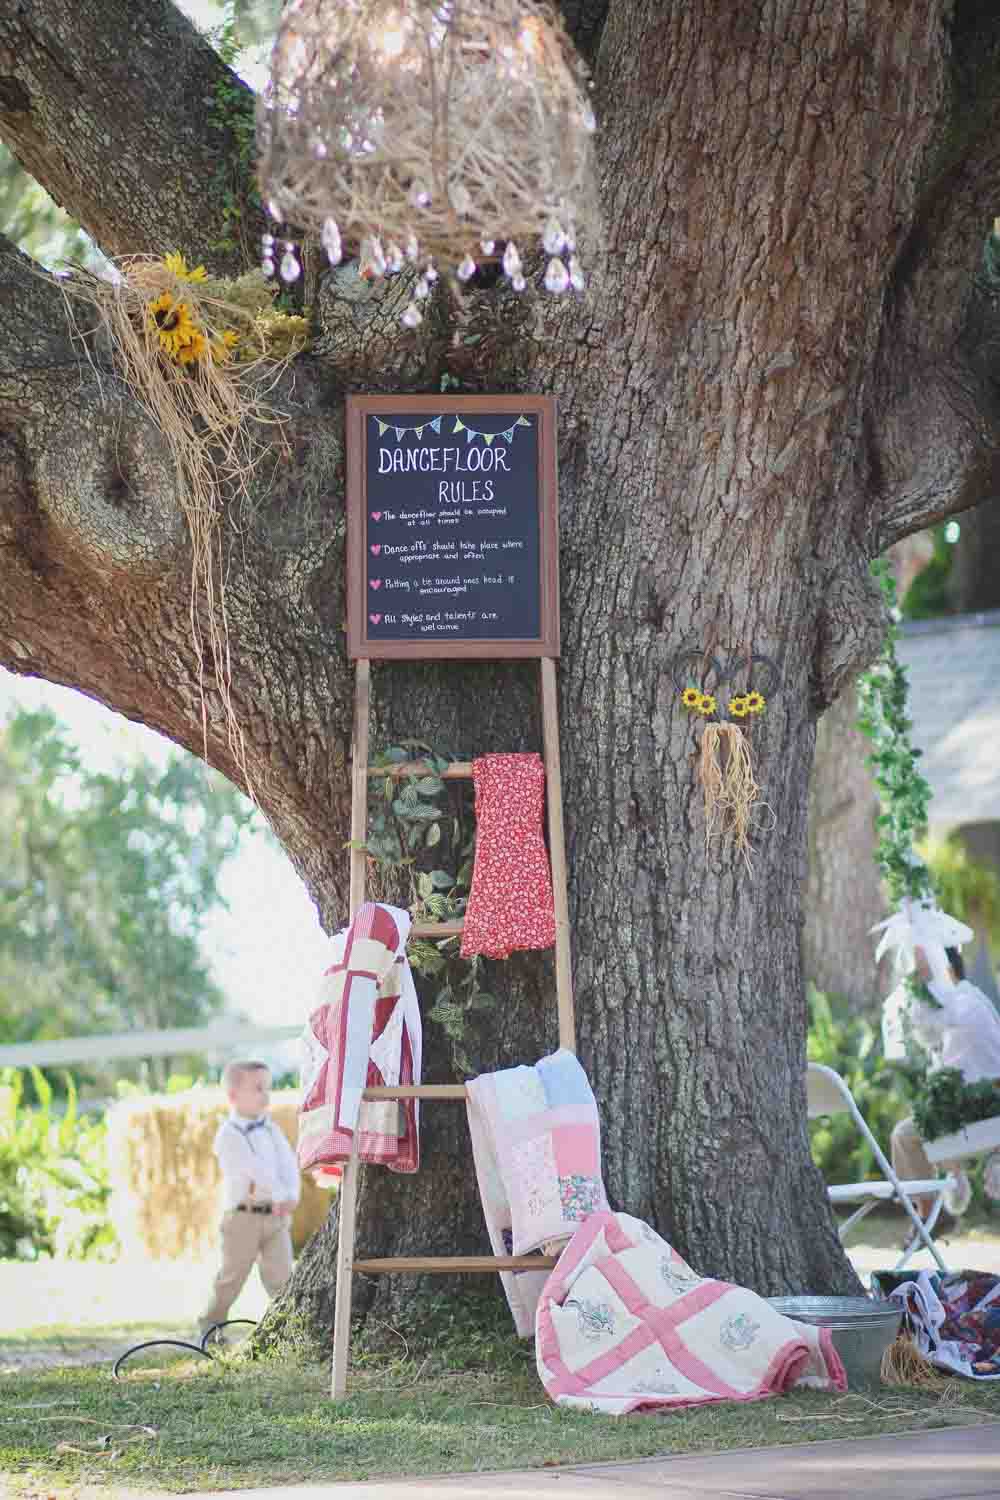 ladder with chalkboard and dance floor rules for outdoor wedding